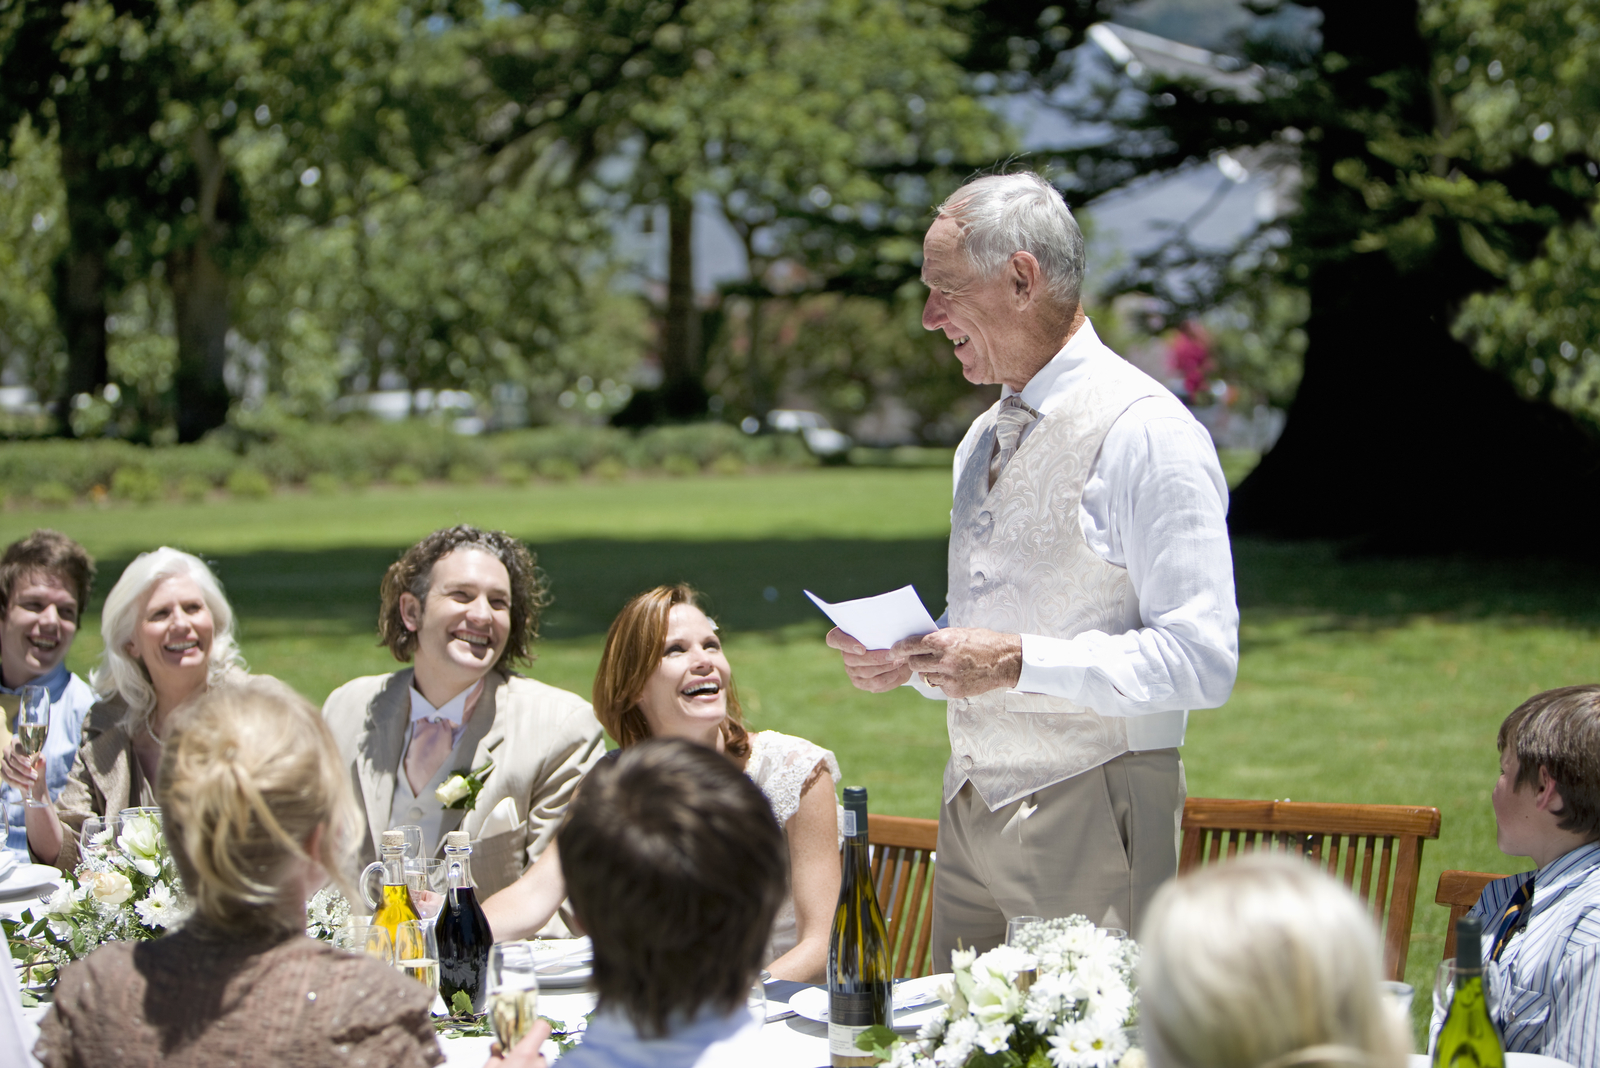 30 Best Father Of The Bride Speeches That Will WOW The Crowd